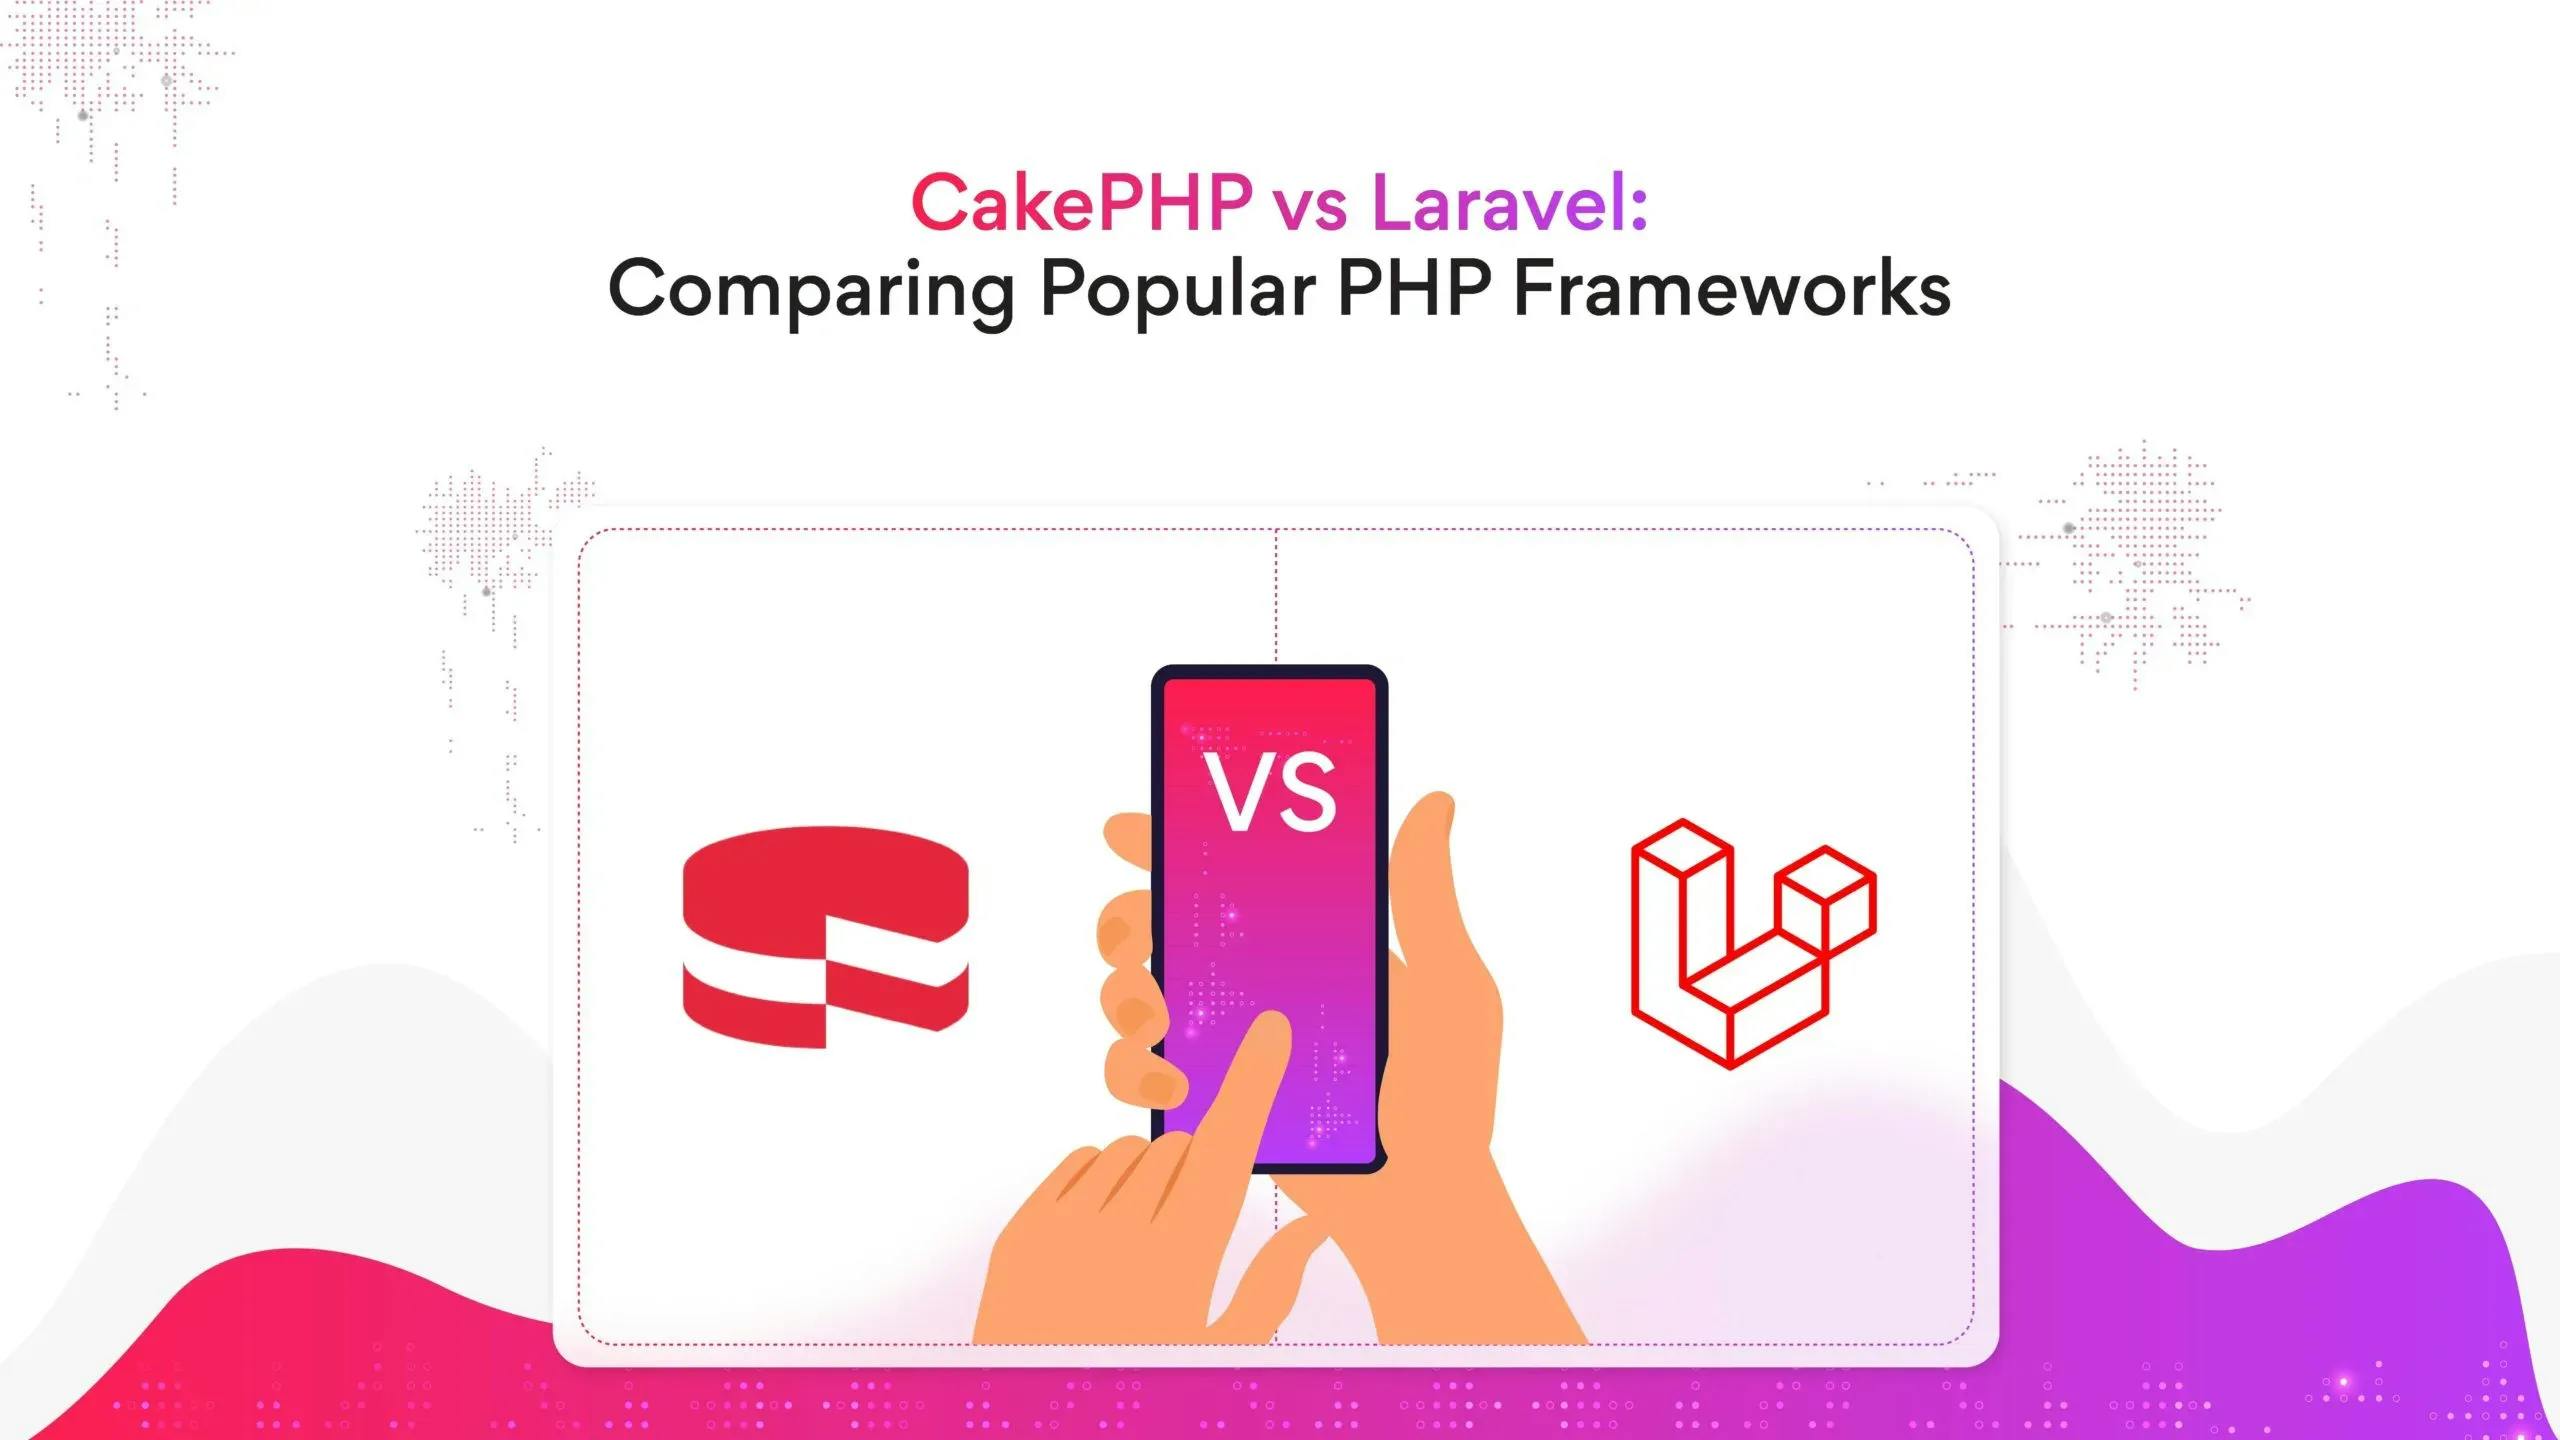 CakePHP vs Laravel: Here’s What You Should Know about These Popular PHP Frameworks